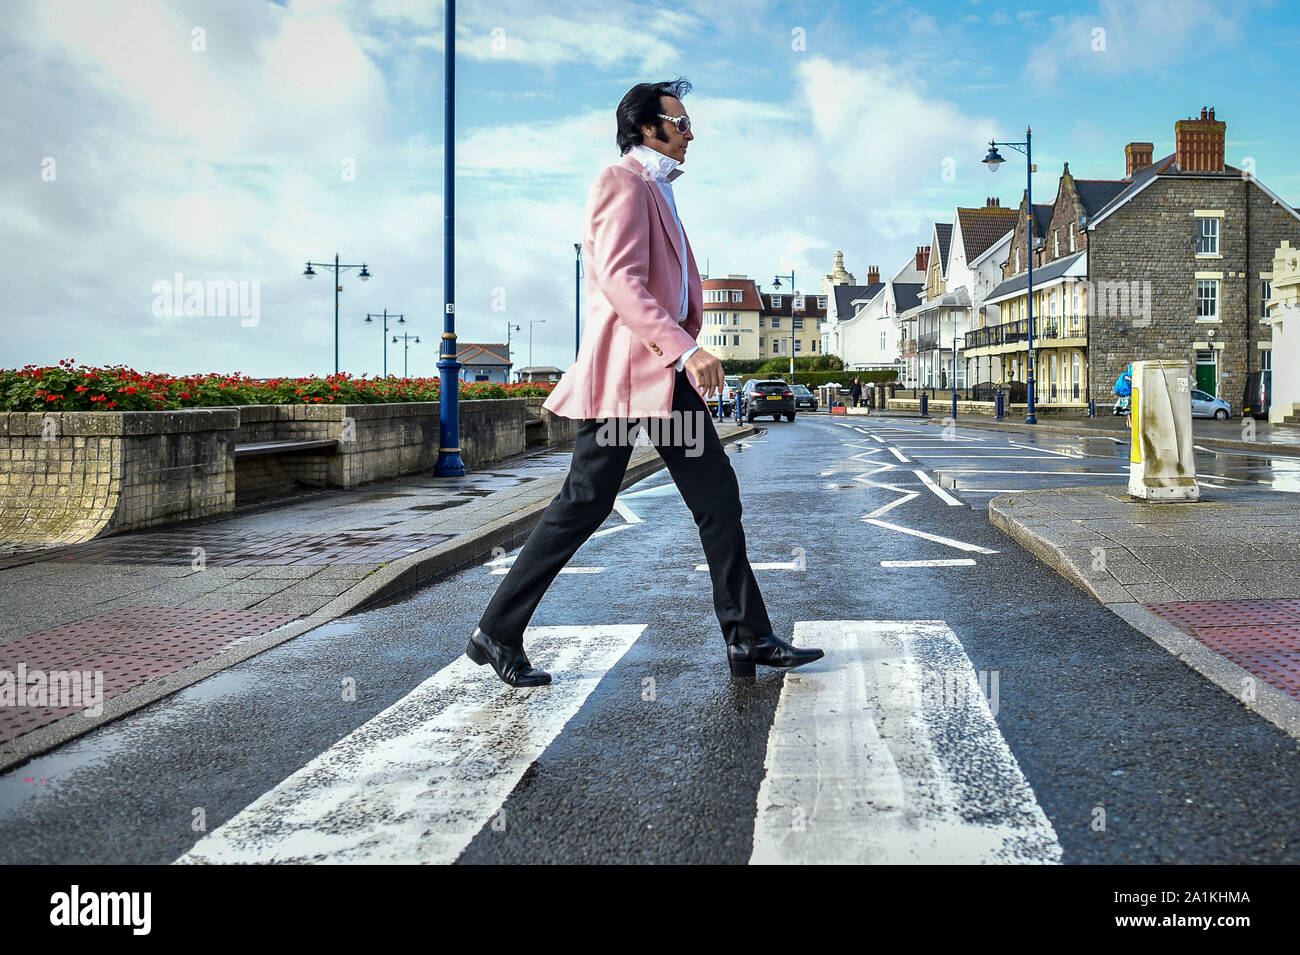 An Elvis crosses the road heading to the annual Porthcawl Elvis Festival in south Wales. The event draws thousands of Elvis fans to the Welsh seaside town to celebrate the 'King of Rock and Roll'. Stock Photo